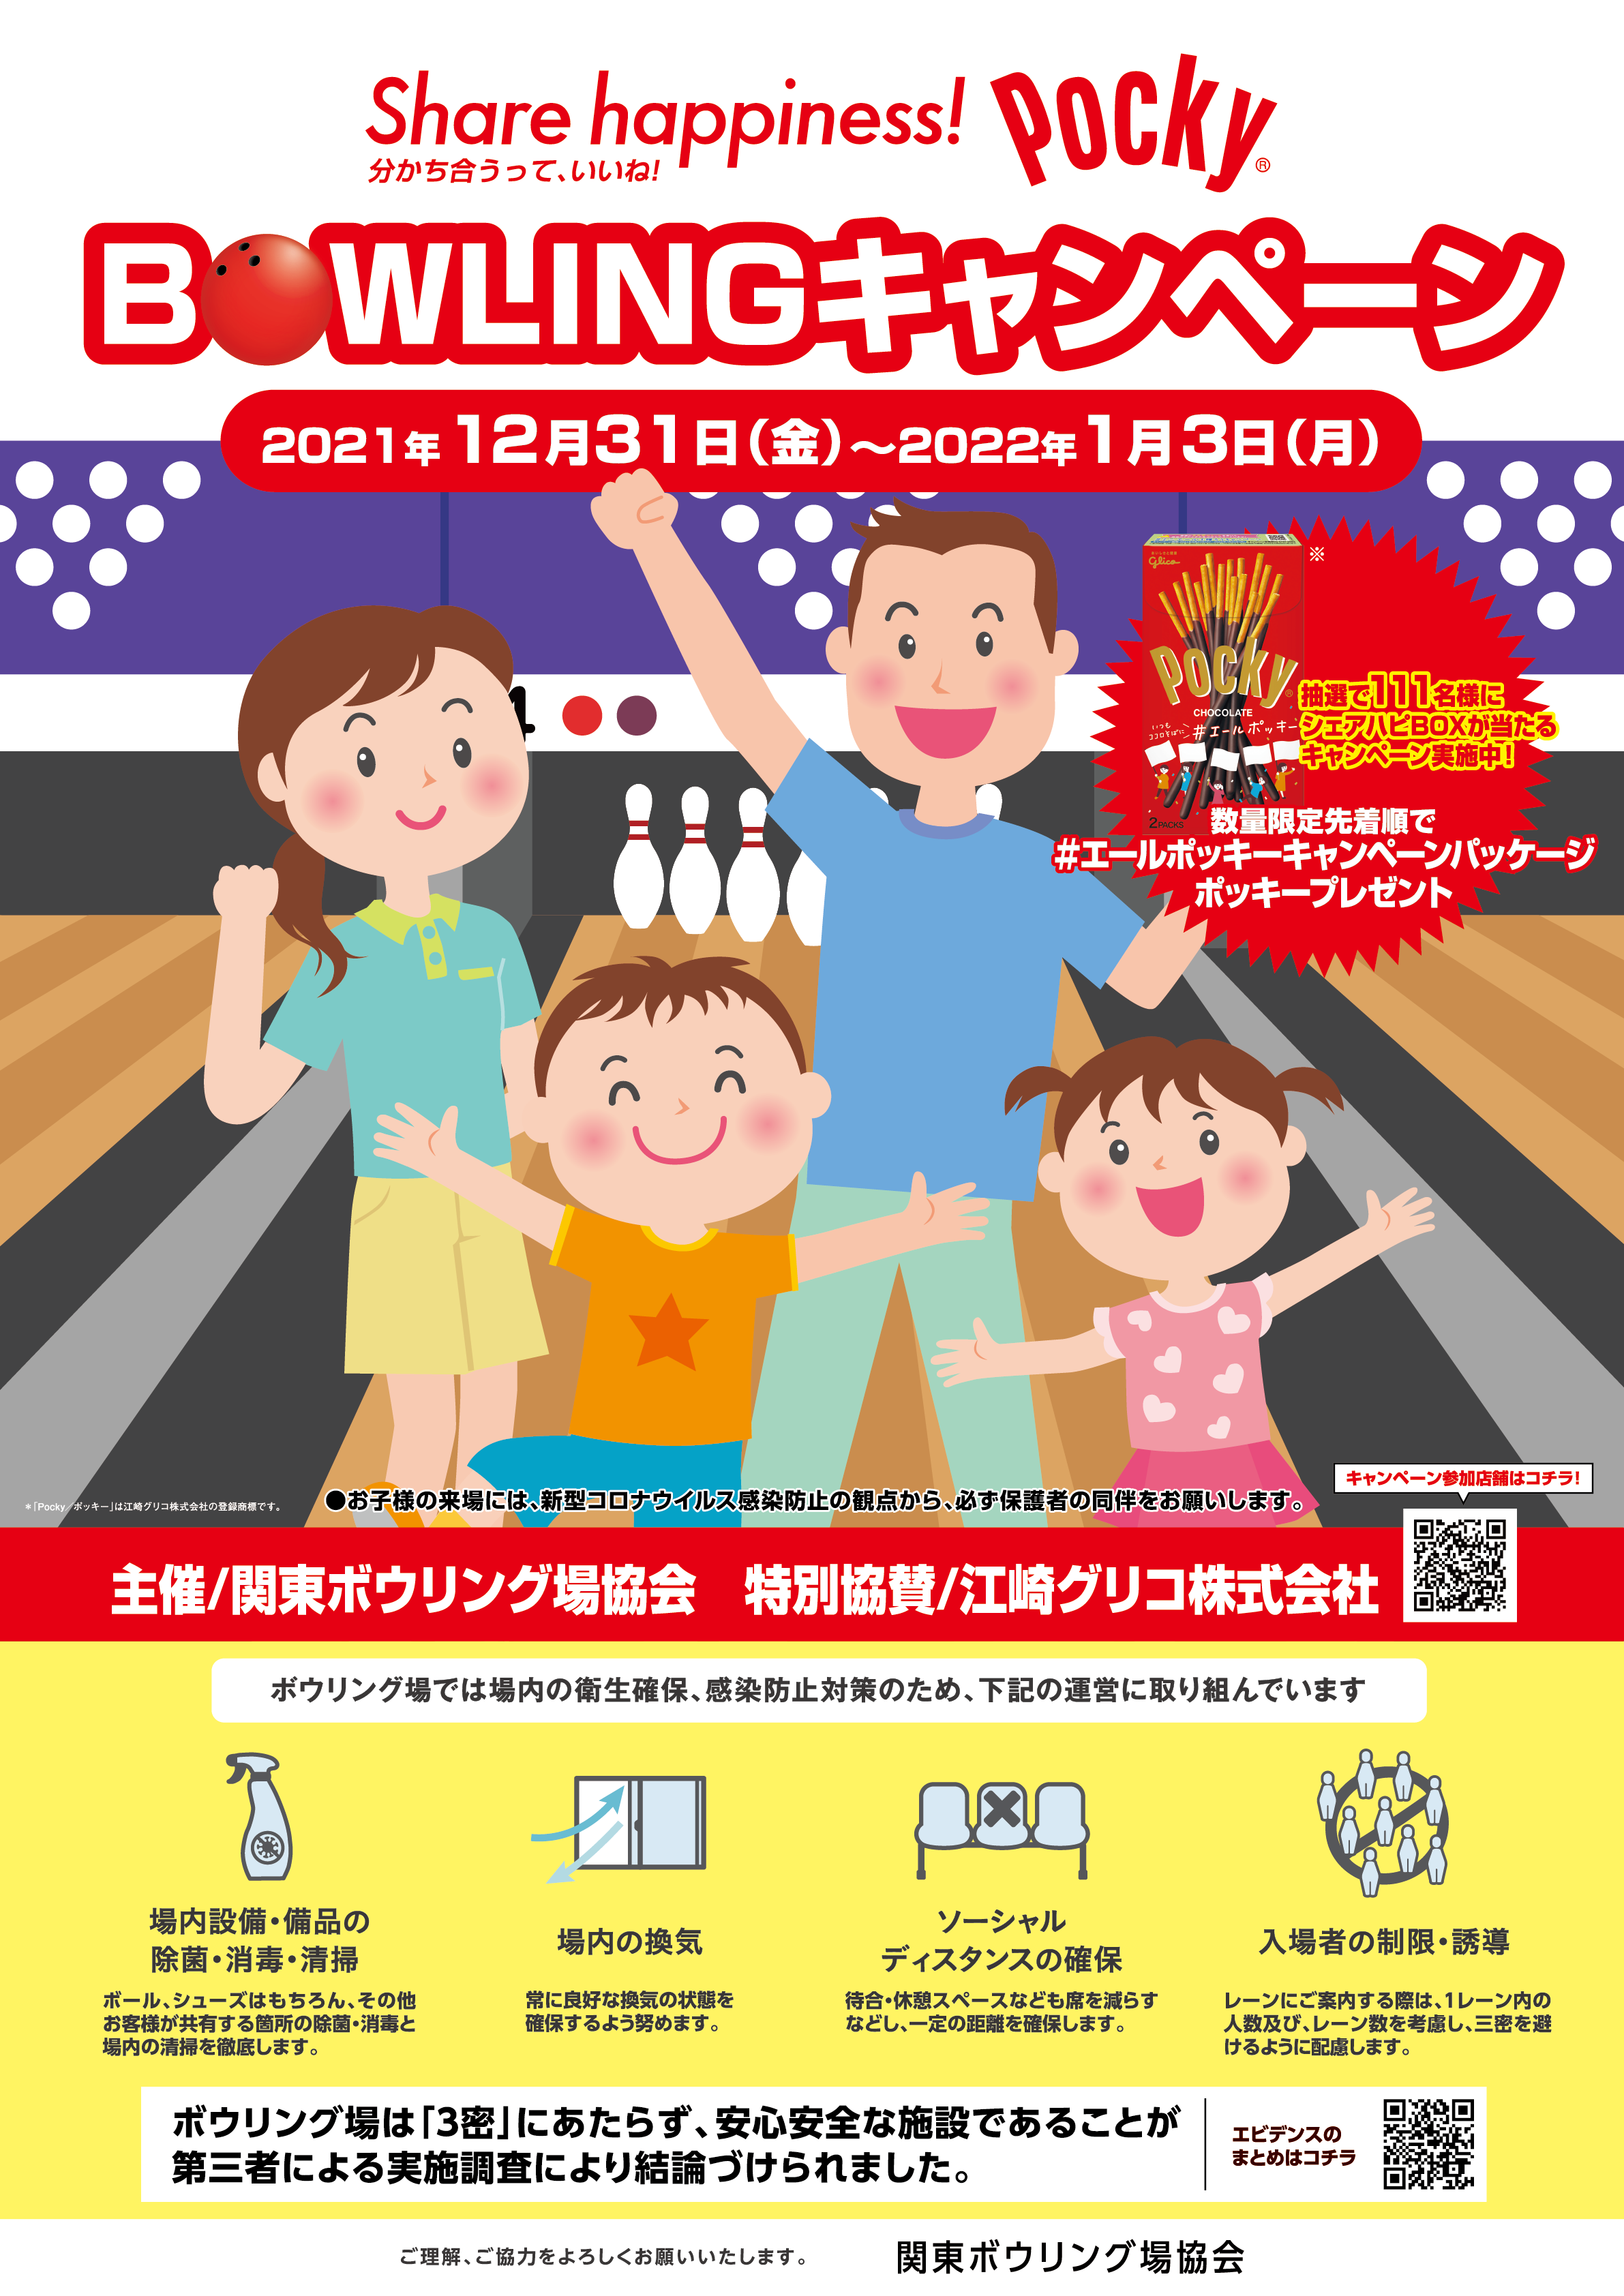 glico_bowling2021.png